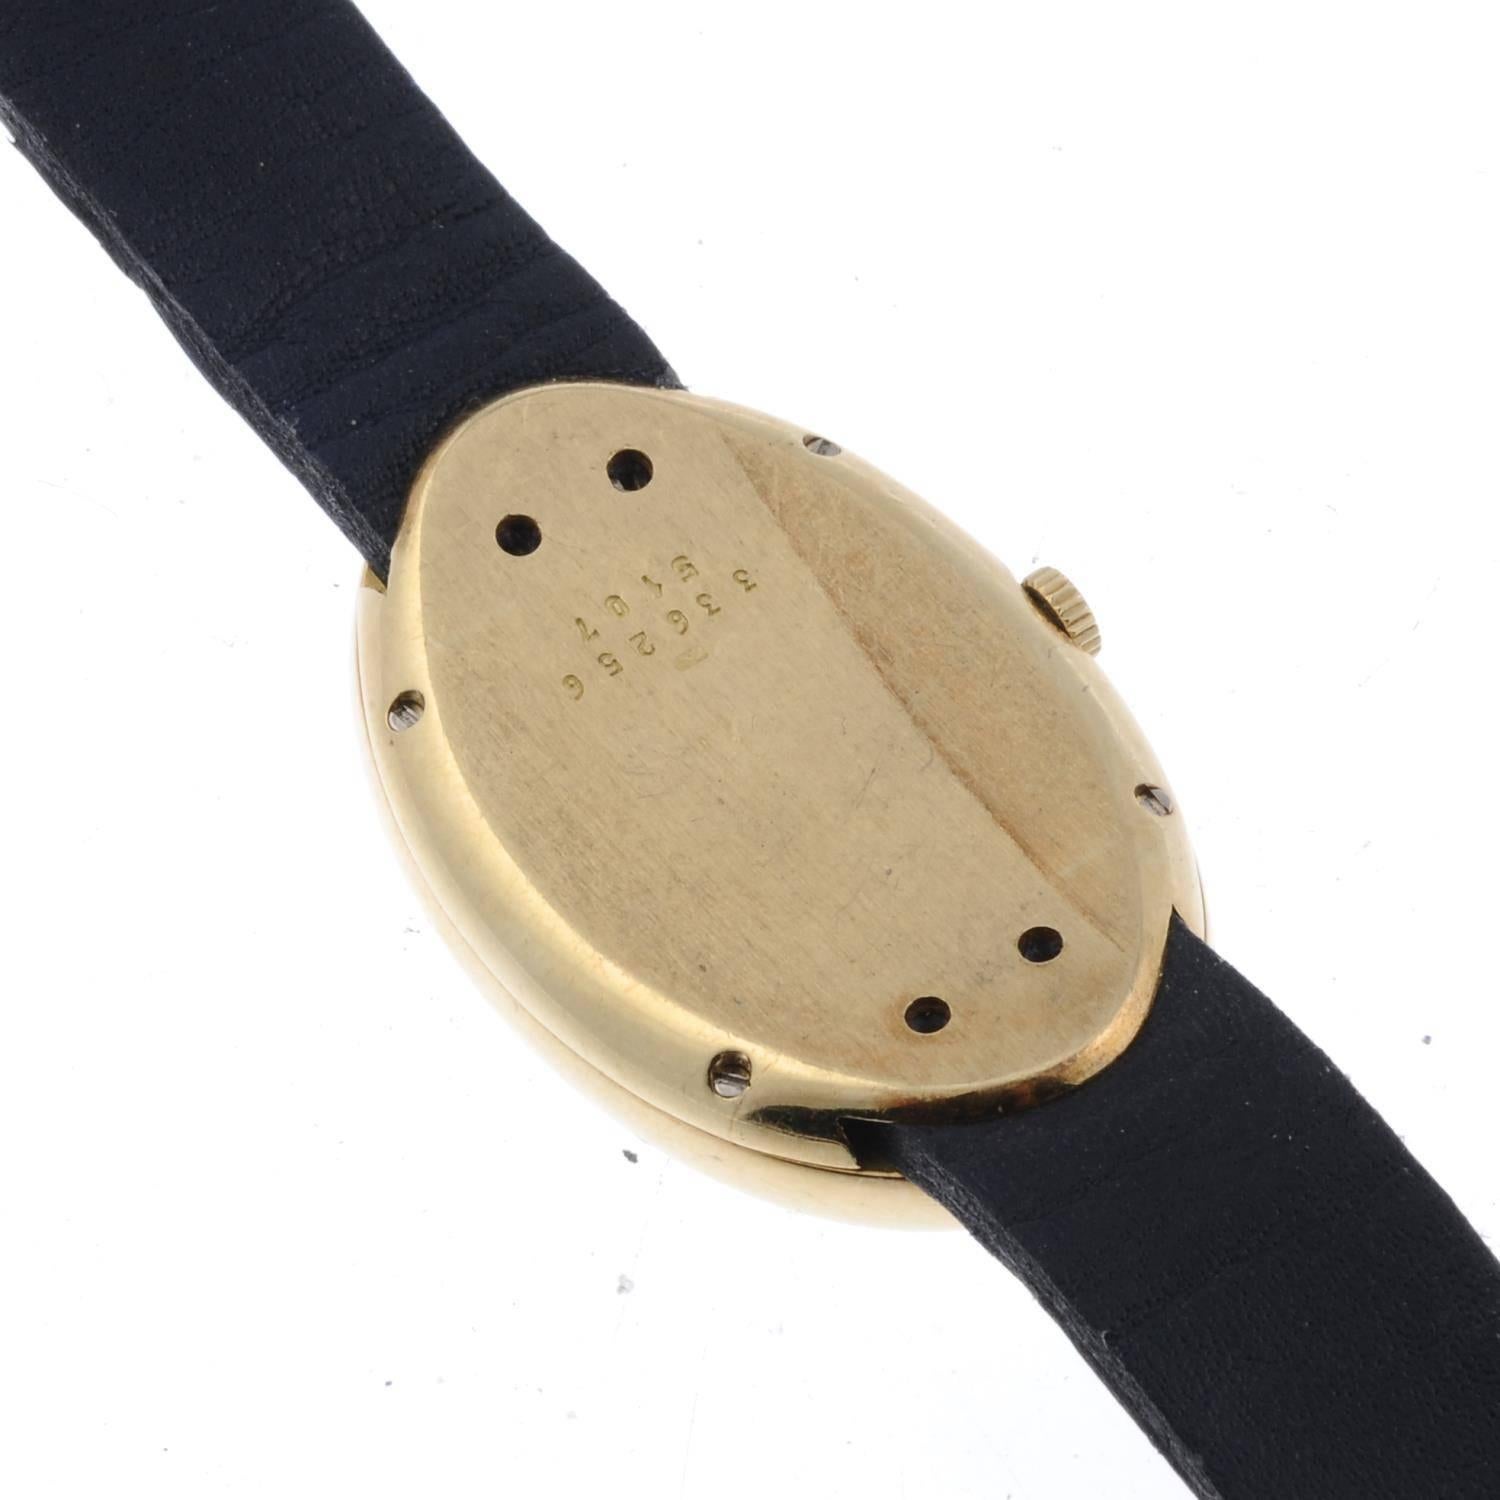 CHOPARD - a lady's wrist watch. Yellow gold case, stamped 750 with poincon. Numbered 336256 5107. Signed manual wind calibre 846. White dial with Roman numeral hour markers. Fitted to an unsigned blue crocodile strap with gold plated pin buckle. 22mm